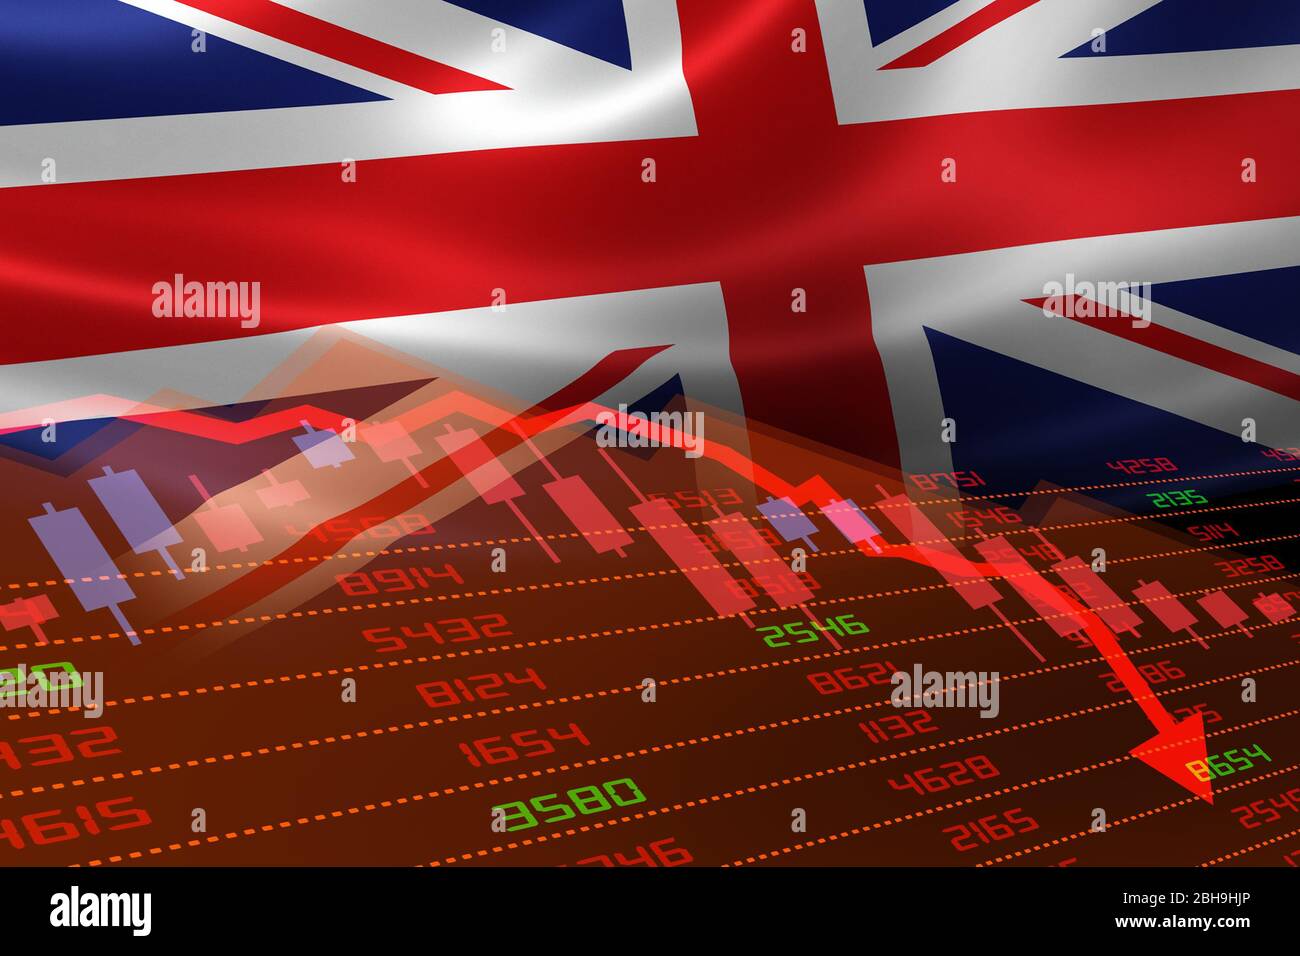 UK economic downturn with stock exchange market showing stock chart down and in red negative territory. Business and financial money market crisis con Stock Photo